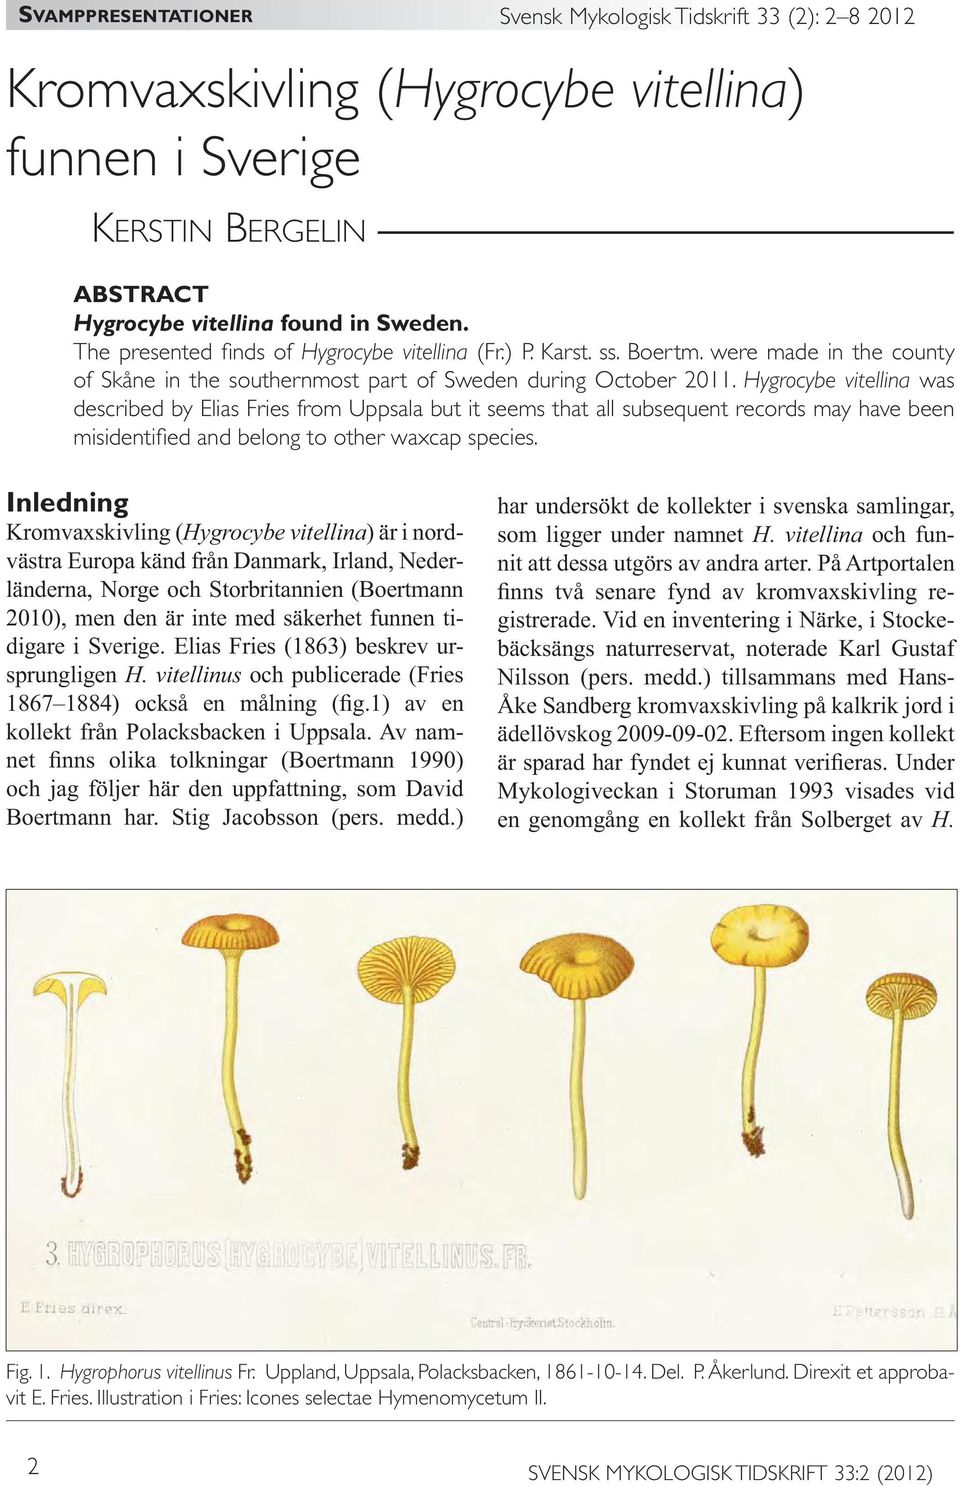 Hygrocybe vitellina was described by Elias Fries from Uppsala but it seems that all subsequent records may have been misidentified and belong to other waxcap species.